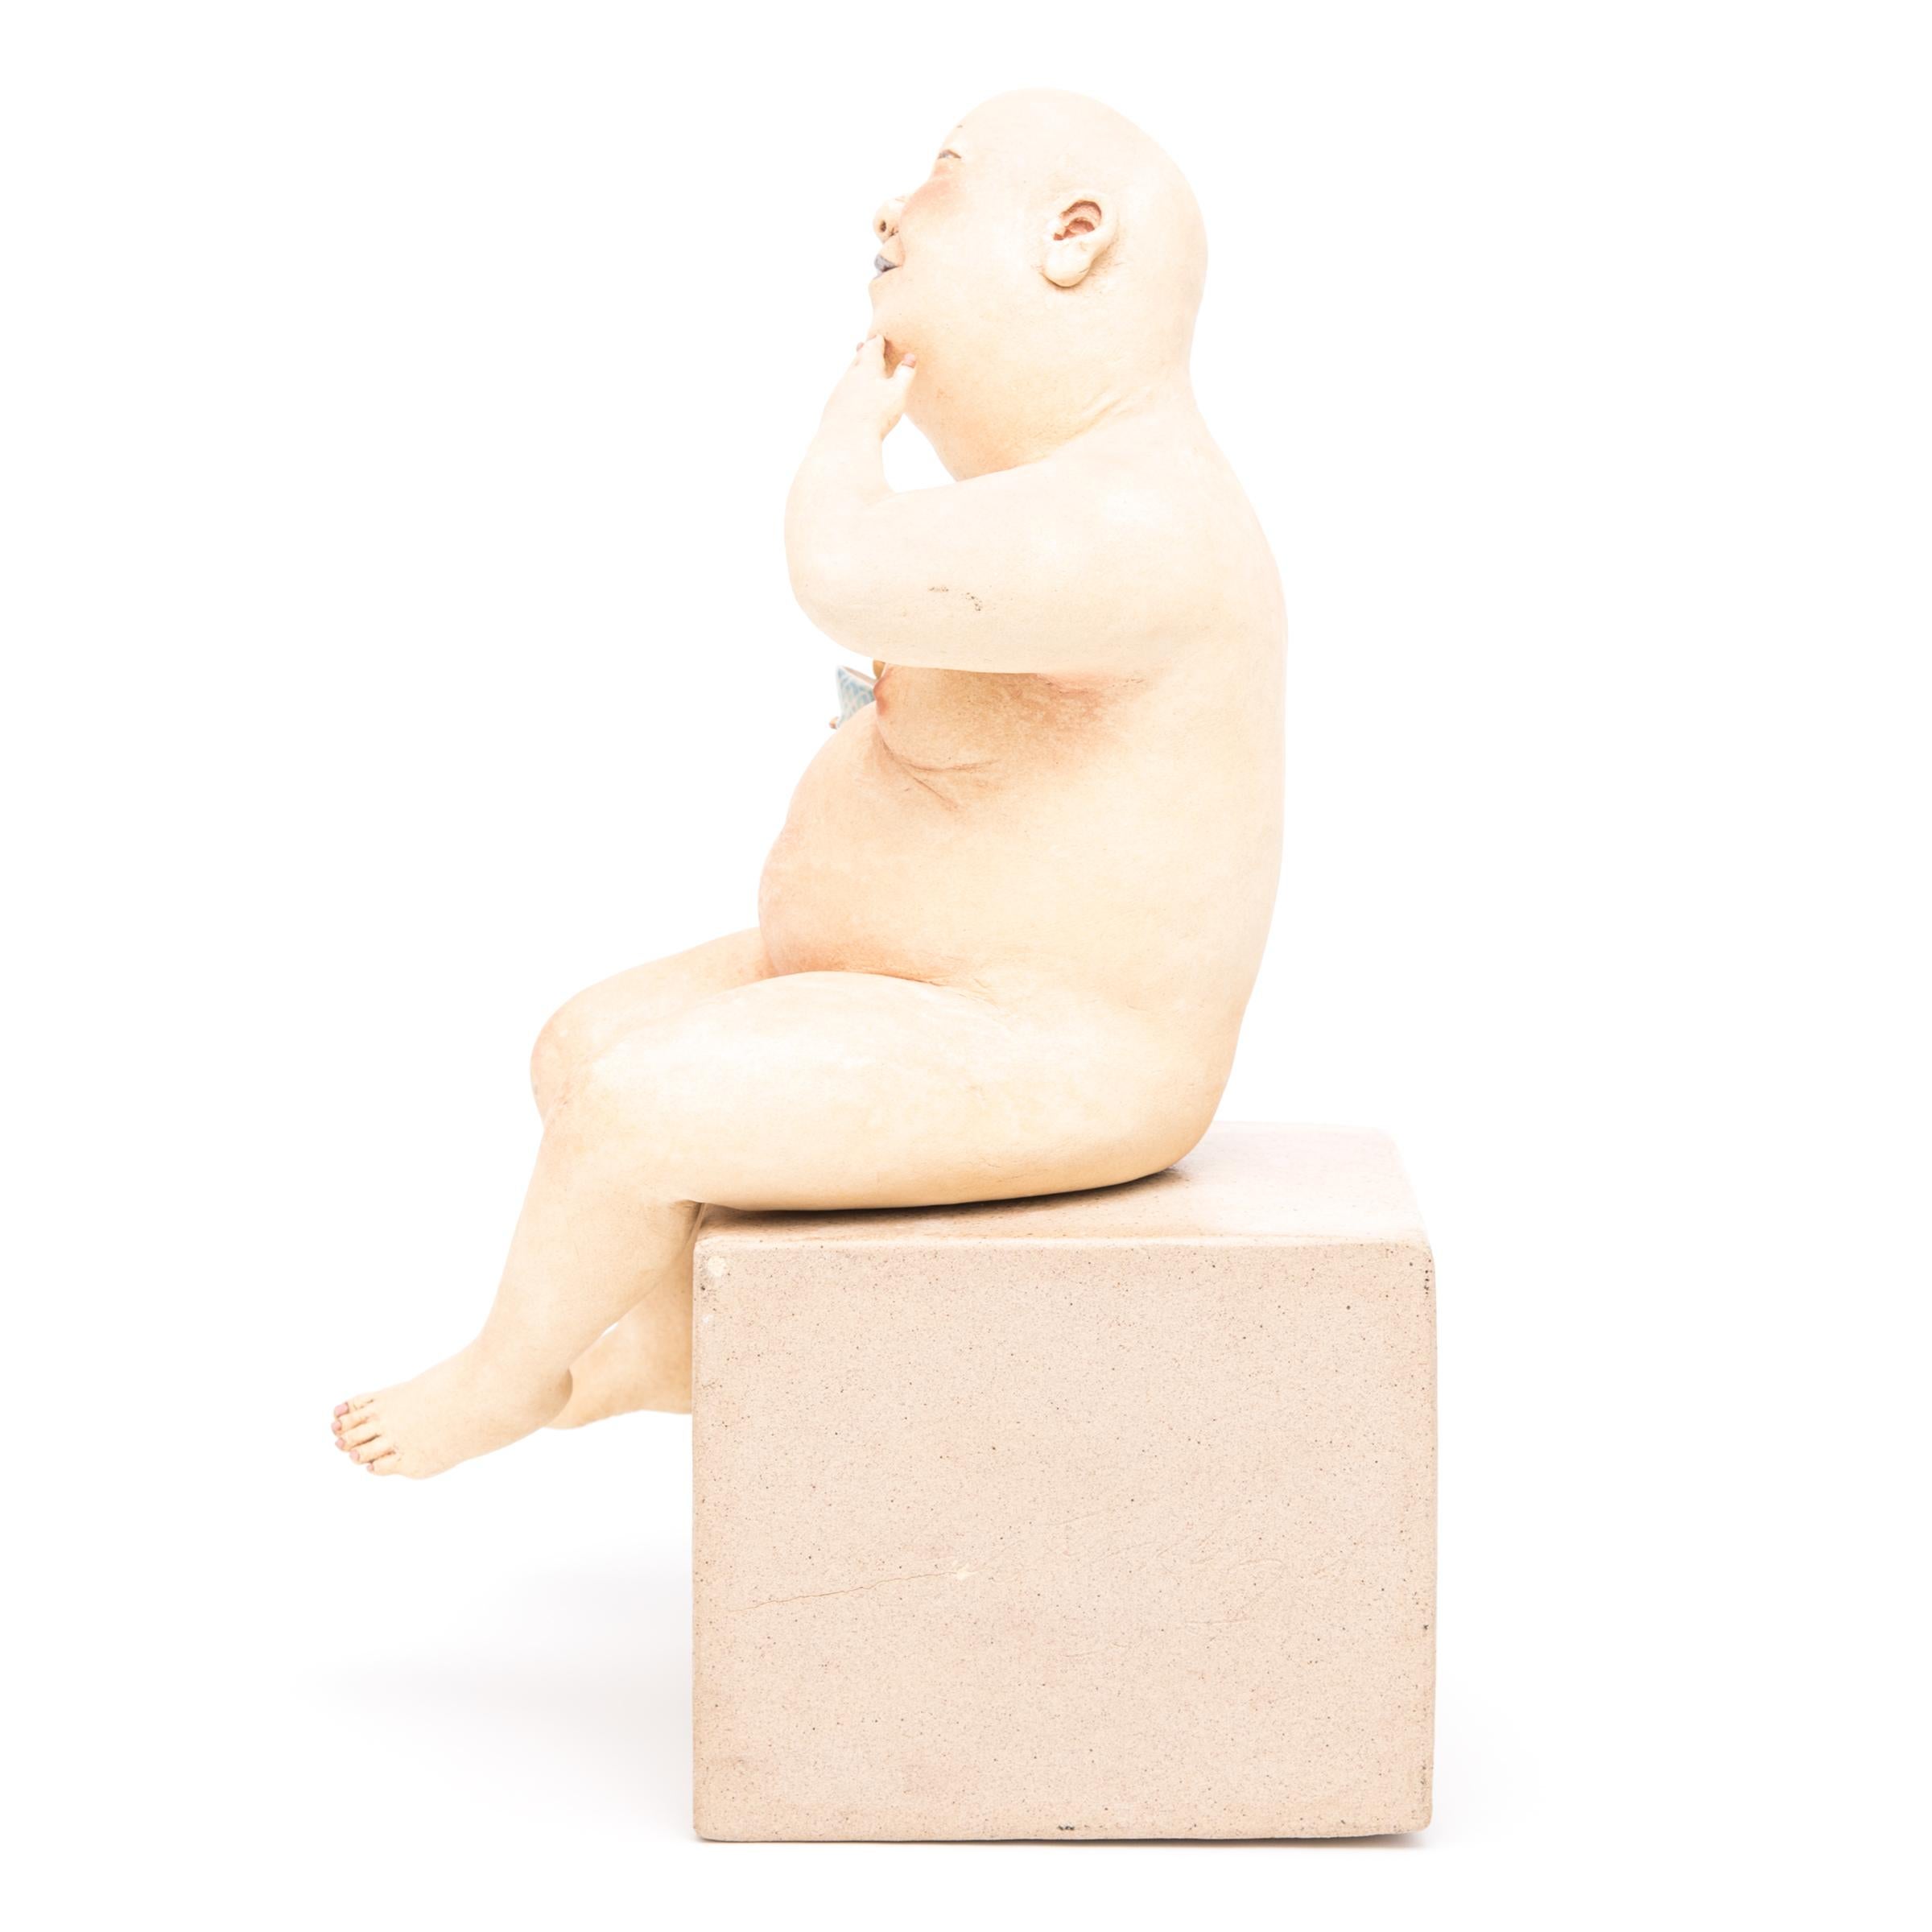 Bald and chunky, Esther Shimazu’s quirky clay figures are unabashedly naked and delightfully indulgent. Drawing upon her Japanese ancestry and experience living in a laid-back Asian community in Hawaii, the artist imbues her figures with a